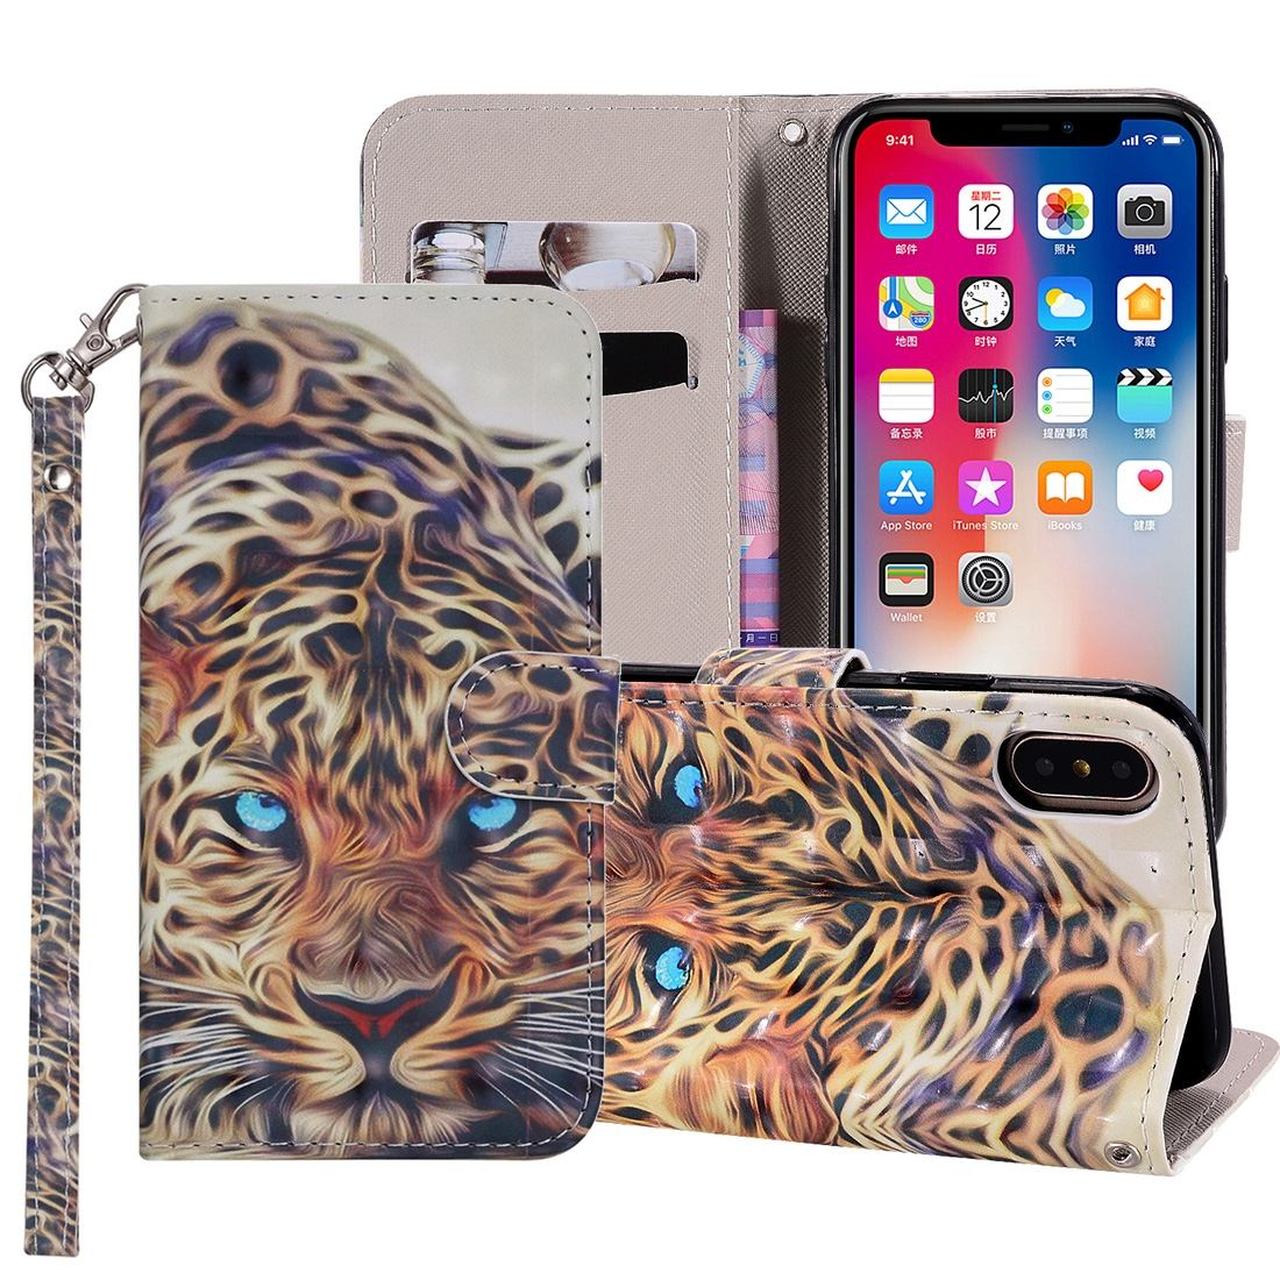 iPhone XS Max Case Leopard Patterned Drawing Horizontal Leather Wallet Cover with Card Slots, Lanyard, & Kickstand